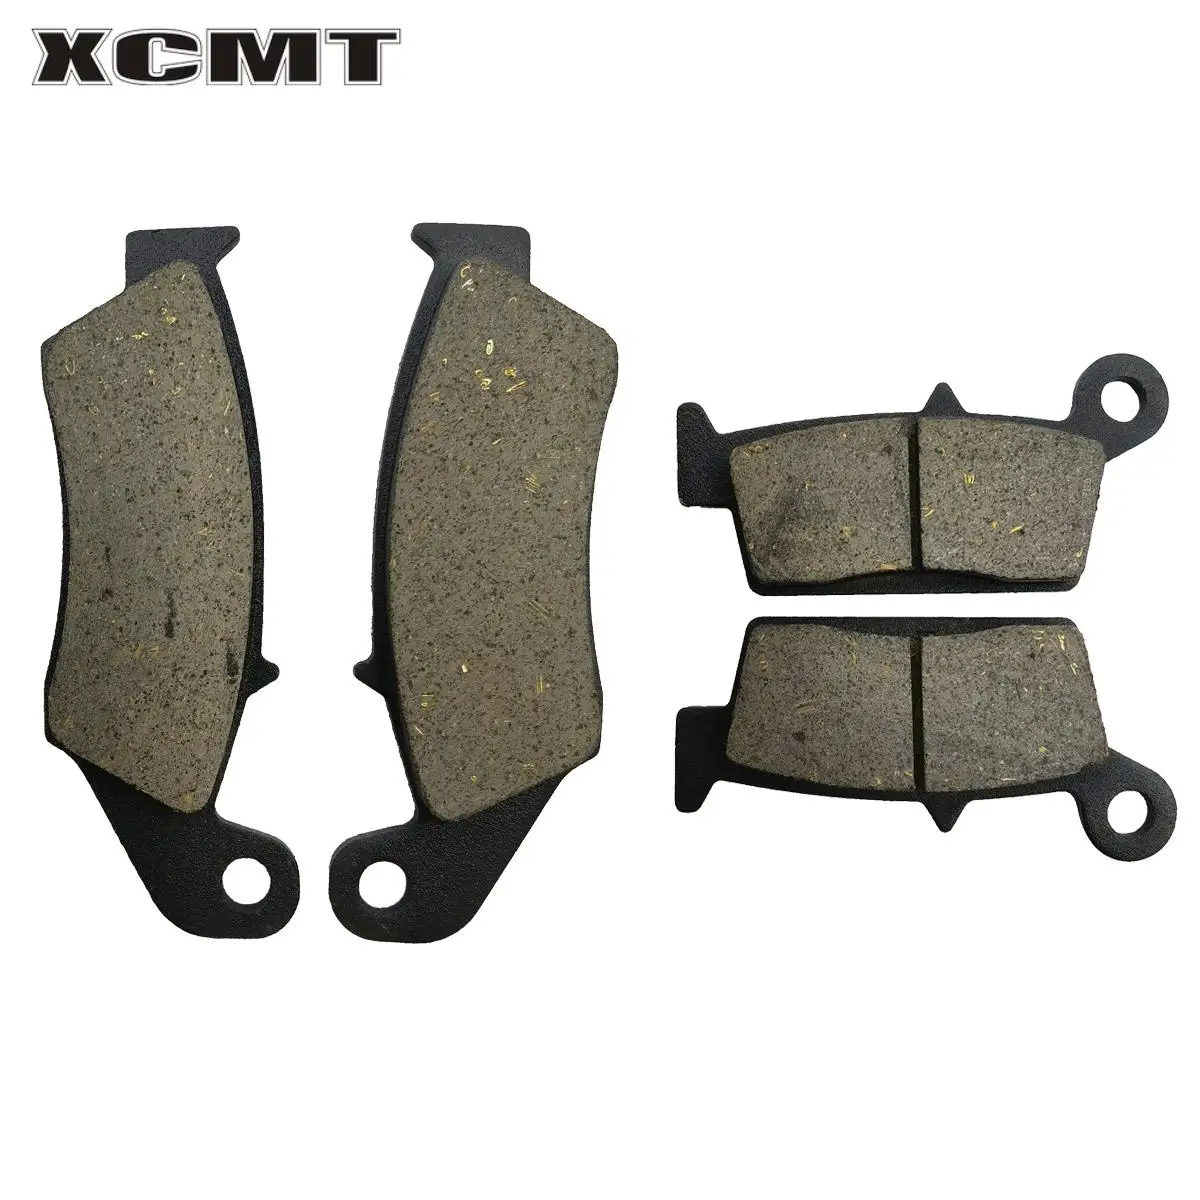 

Motorcycle Front and Rear Brake Pads For GAS GAS MX MC 125 250 300 Trail Halley EC 450 500 FSR FSE Enduro Pampera 450 4T SM